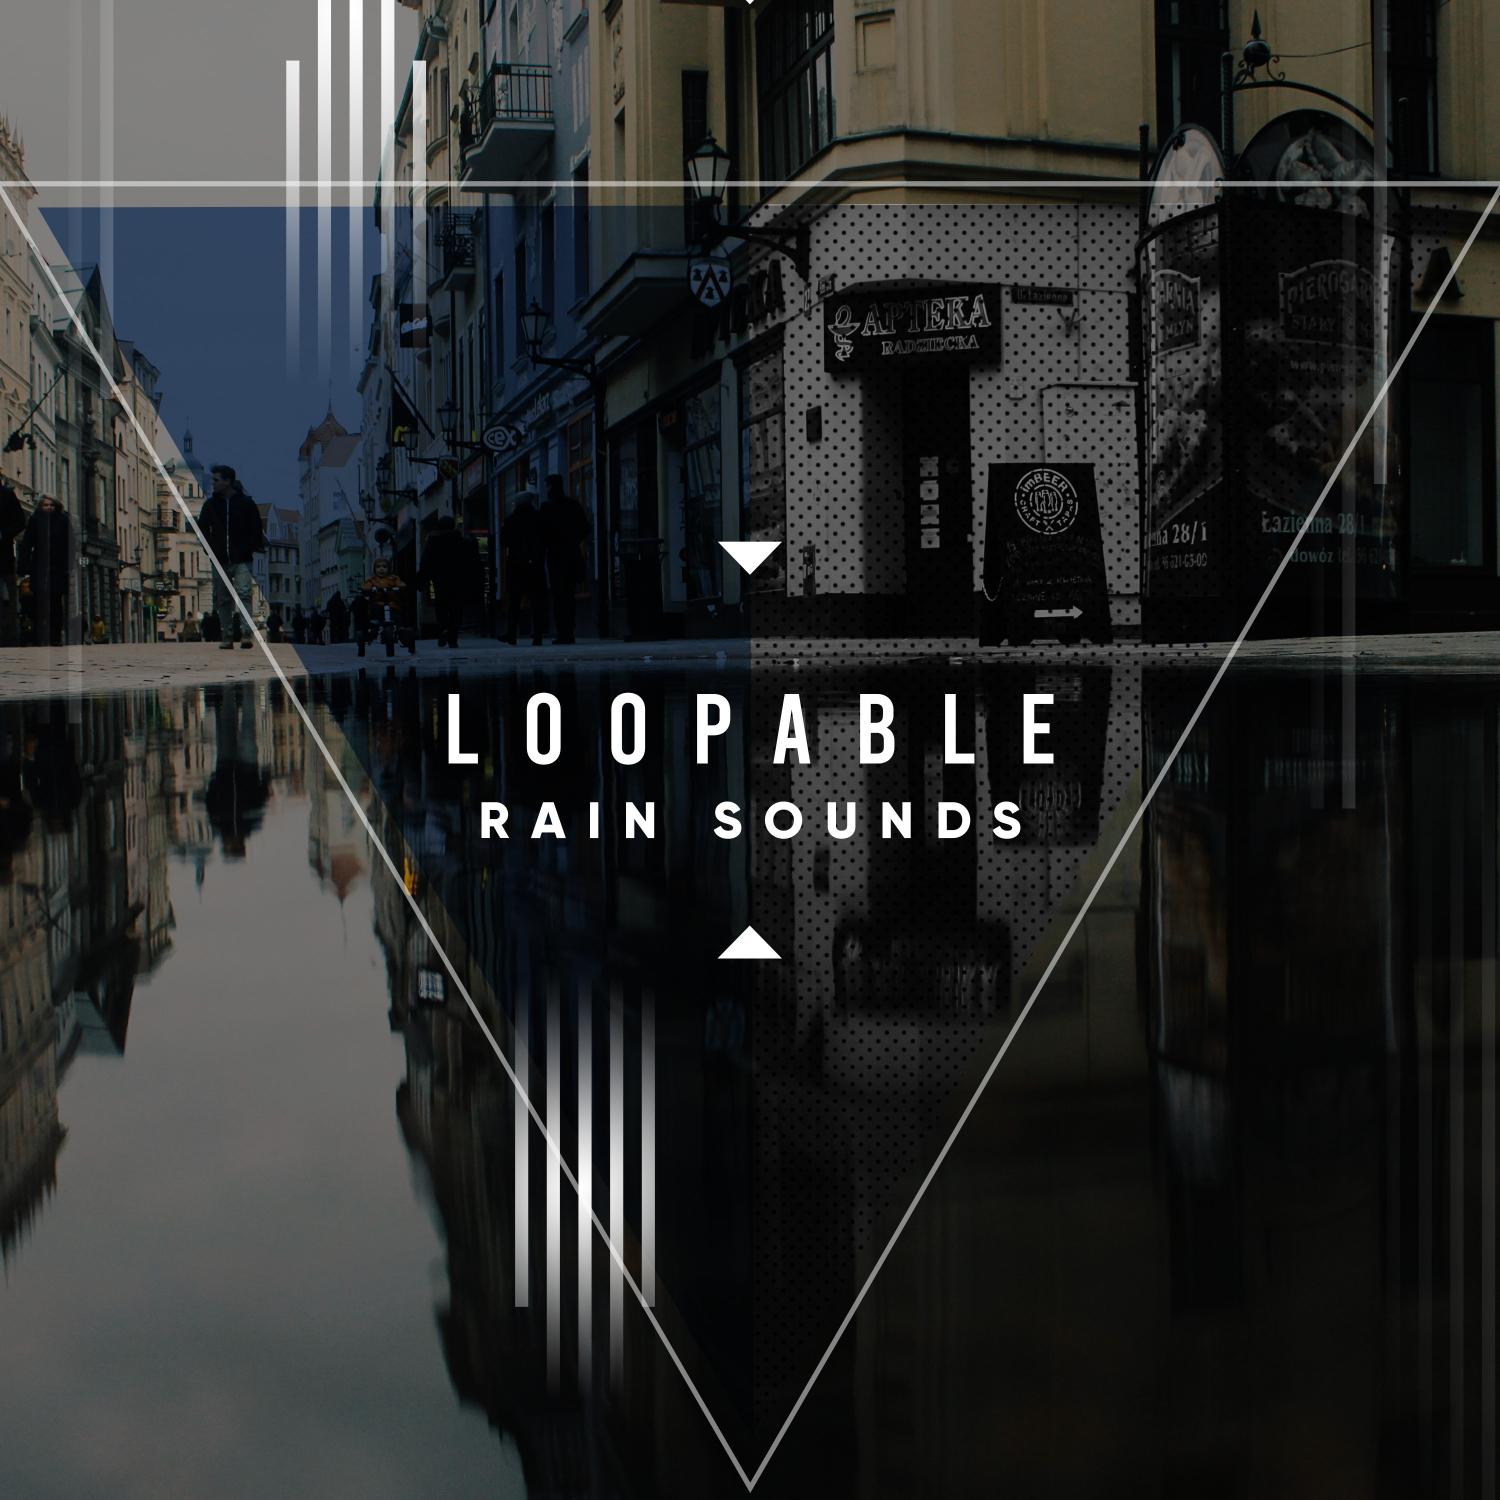 15 Loopable Rain Sounds to Loop